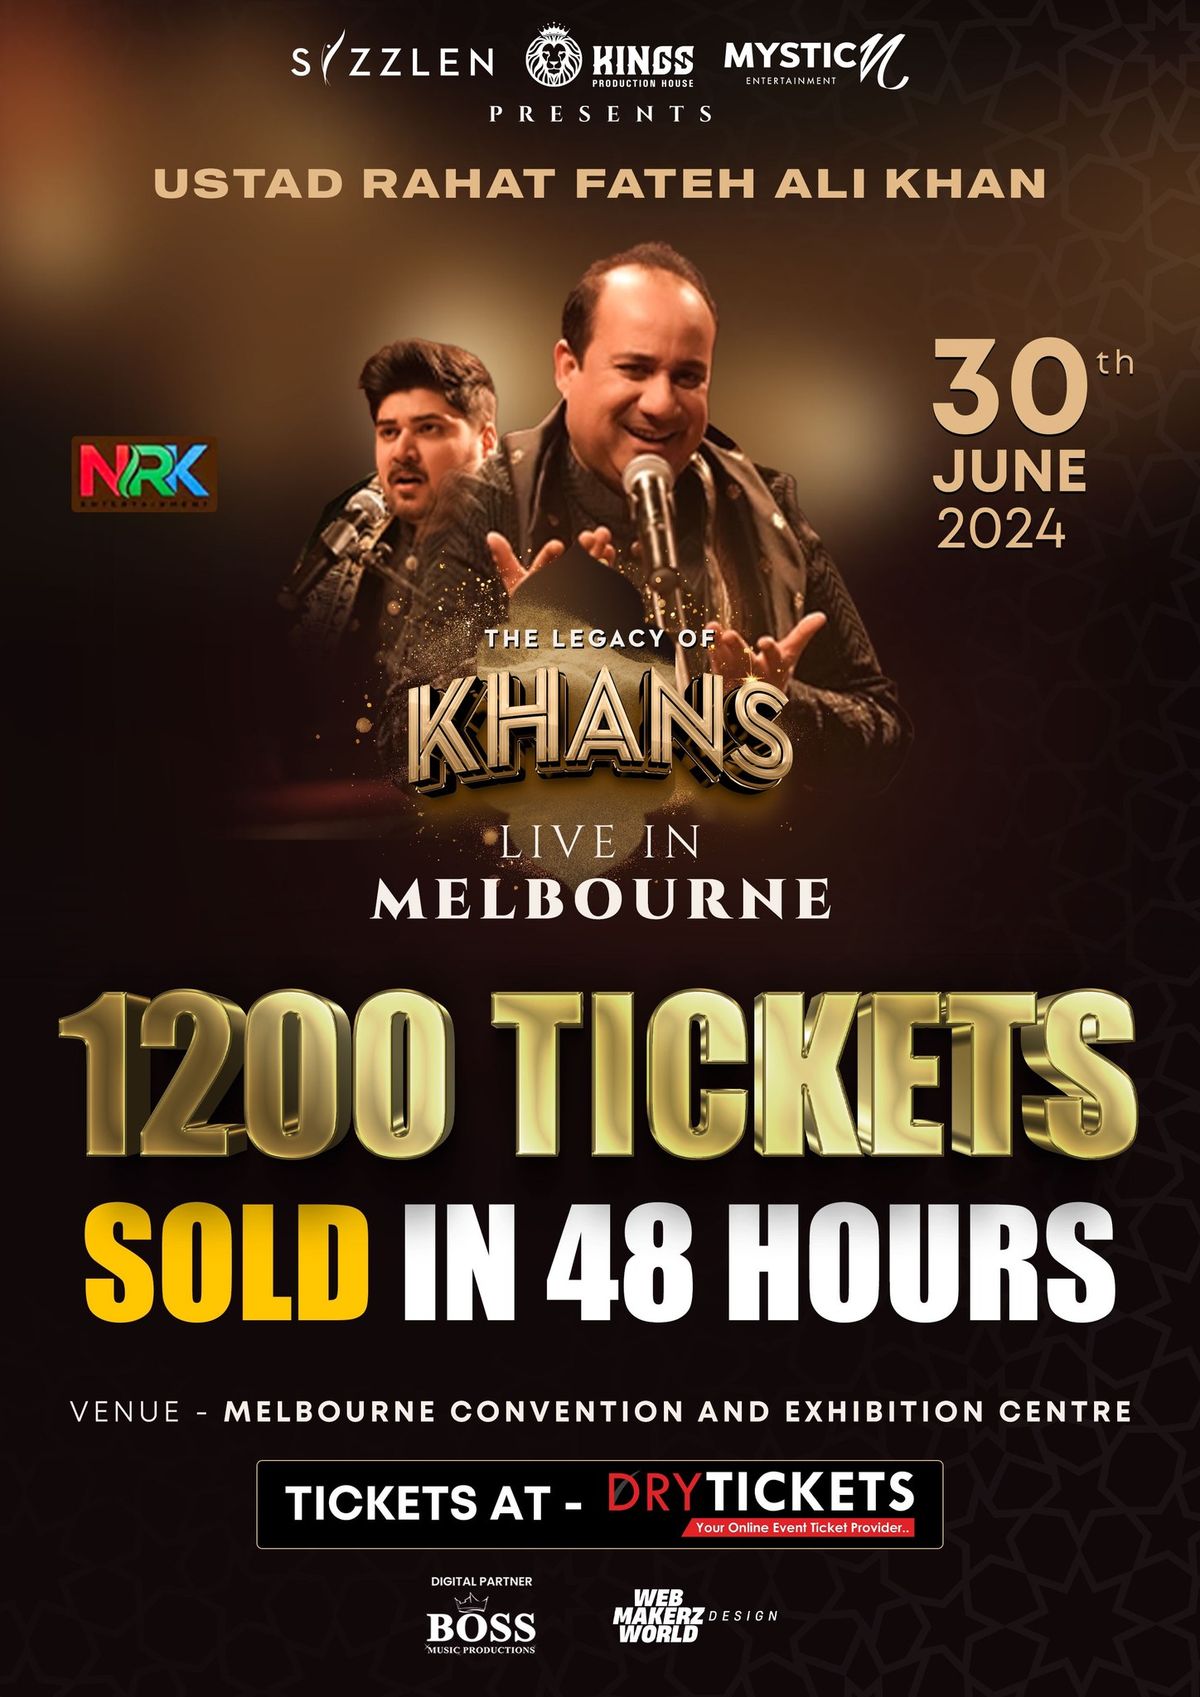 Ustaad Rahat Fateh Ali Khan Live in MELBOURNE 2024: The Legacy of Khans, 30th June 2024 at MCEC